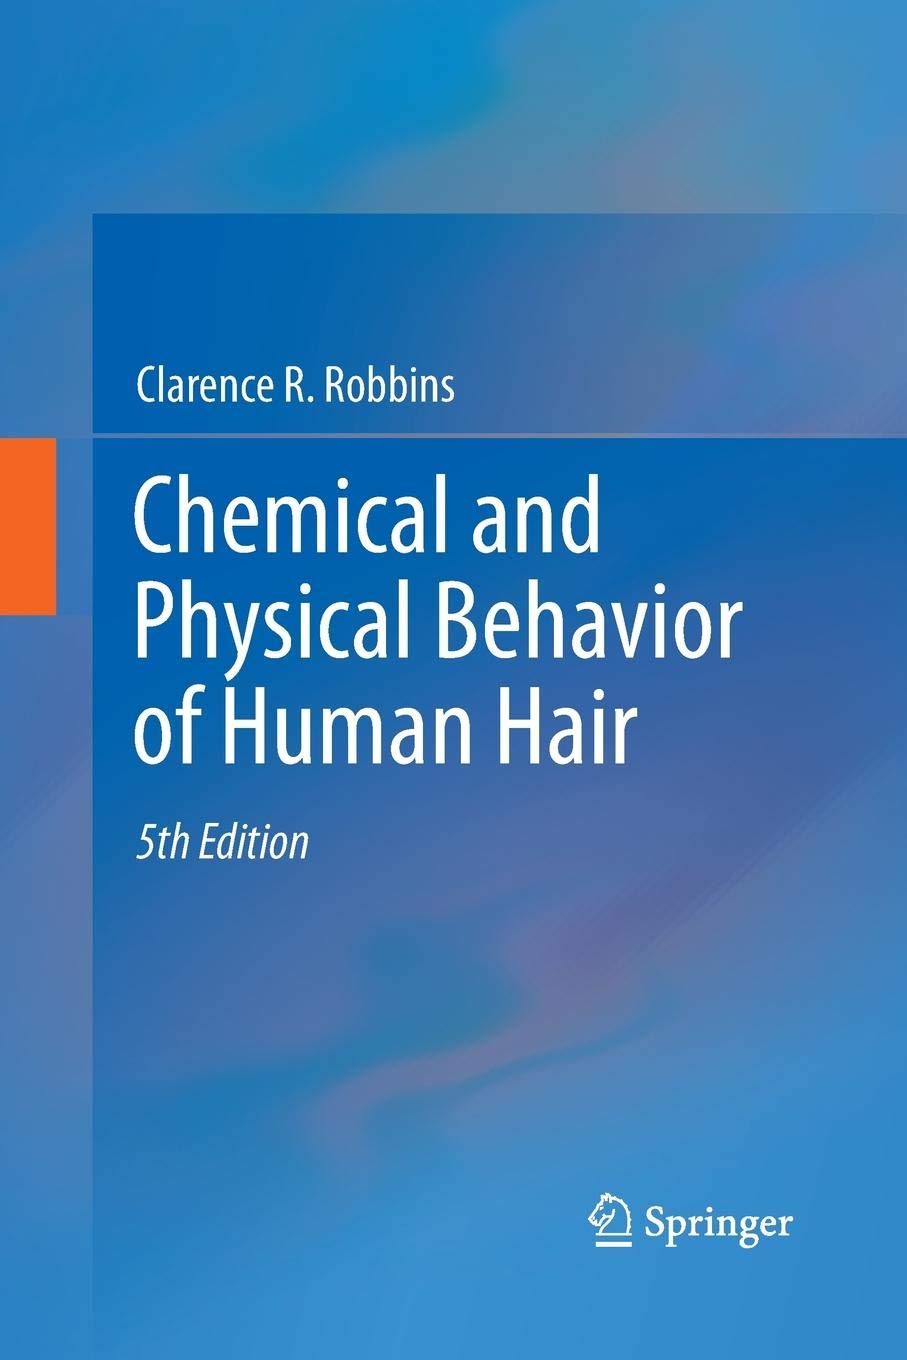 Chemical and physical behavior of human hair